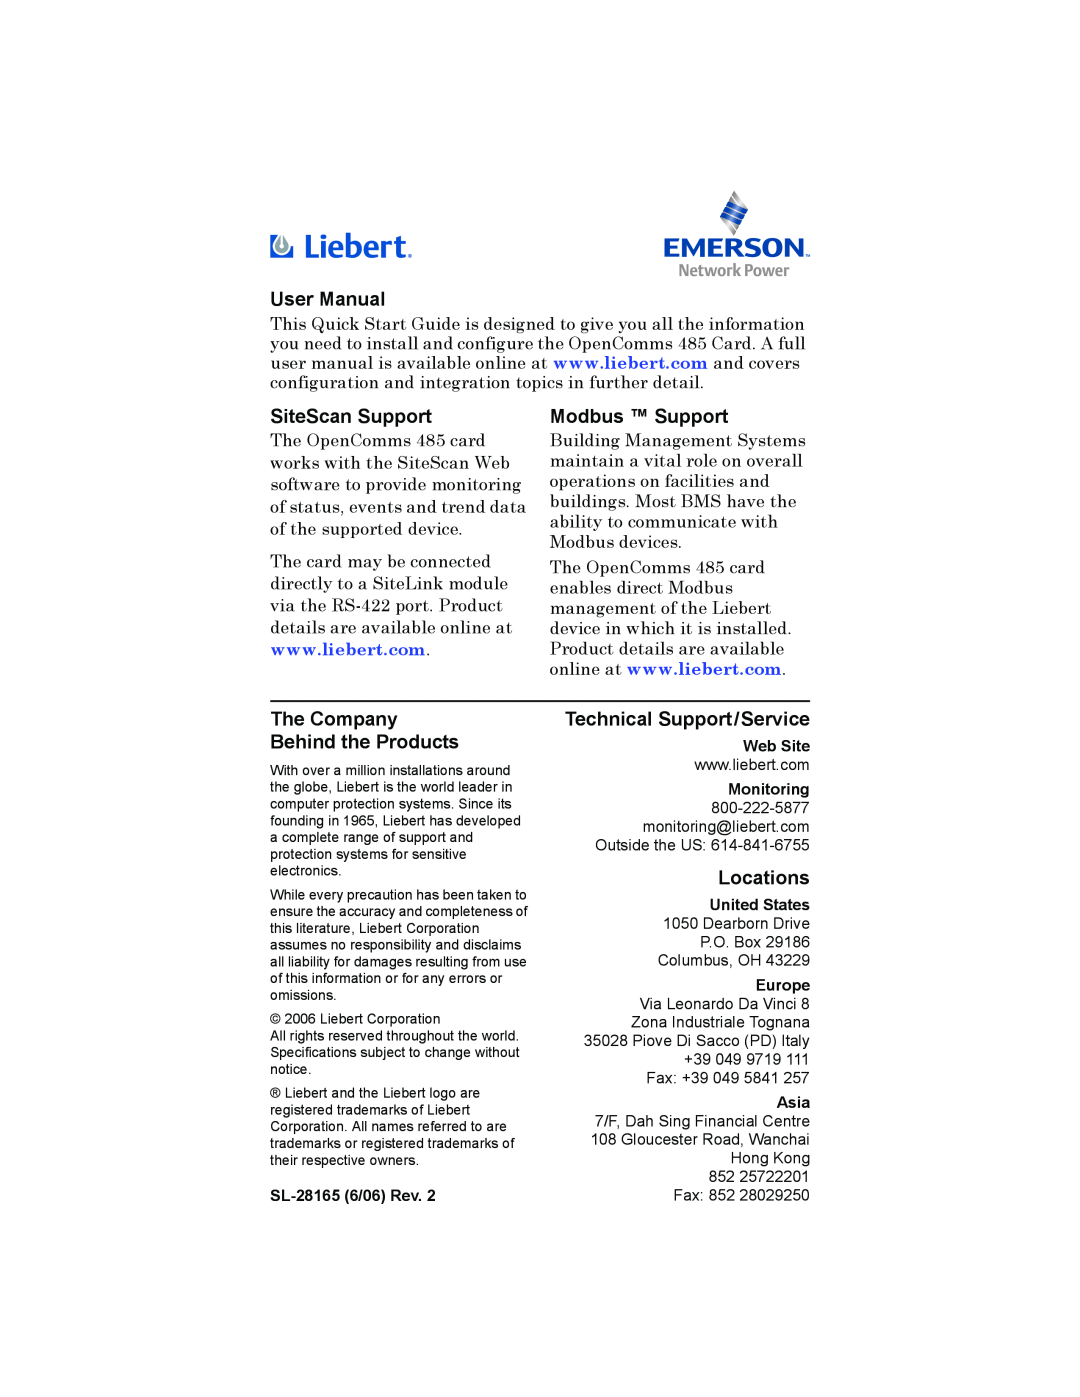 Liebert 485 User Manual, SiteScan Support, Modbus Support, The Company Behind the Products, Technical Support/Service 